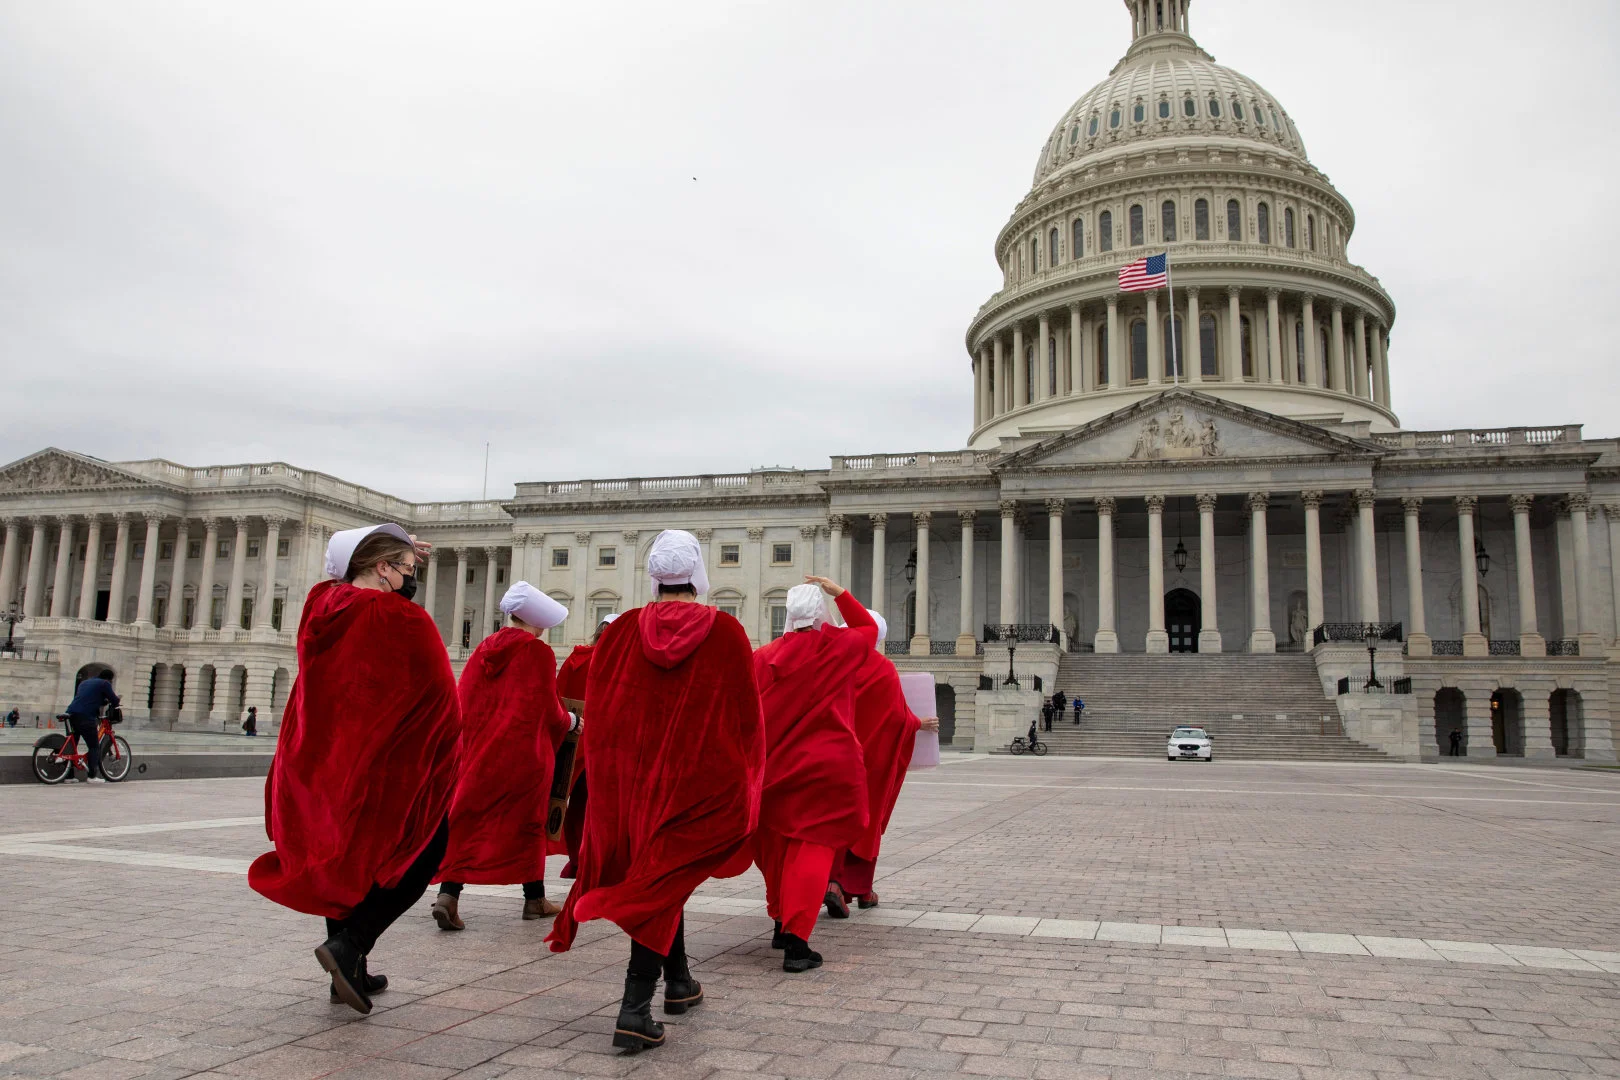 Margaret Atwood, author of "The Handmaid's Tale," responds to the US draft on abortion rights